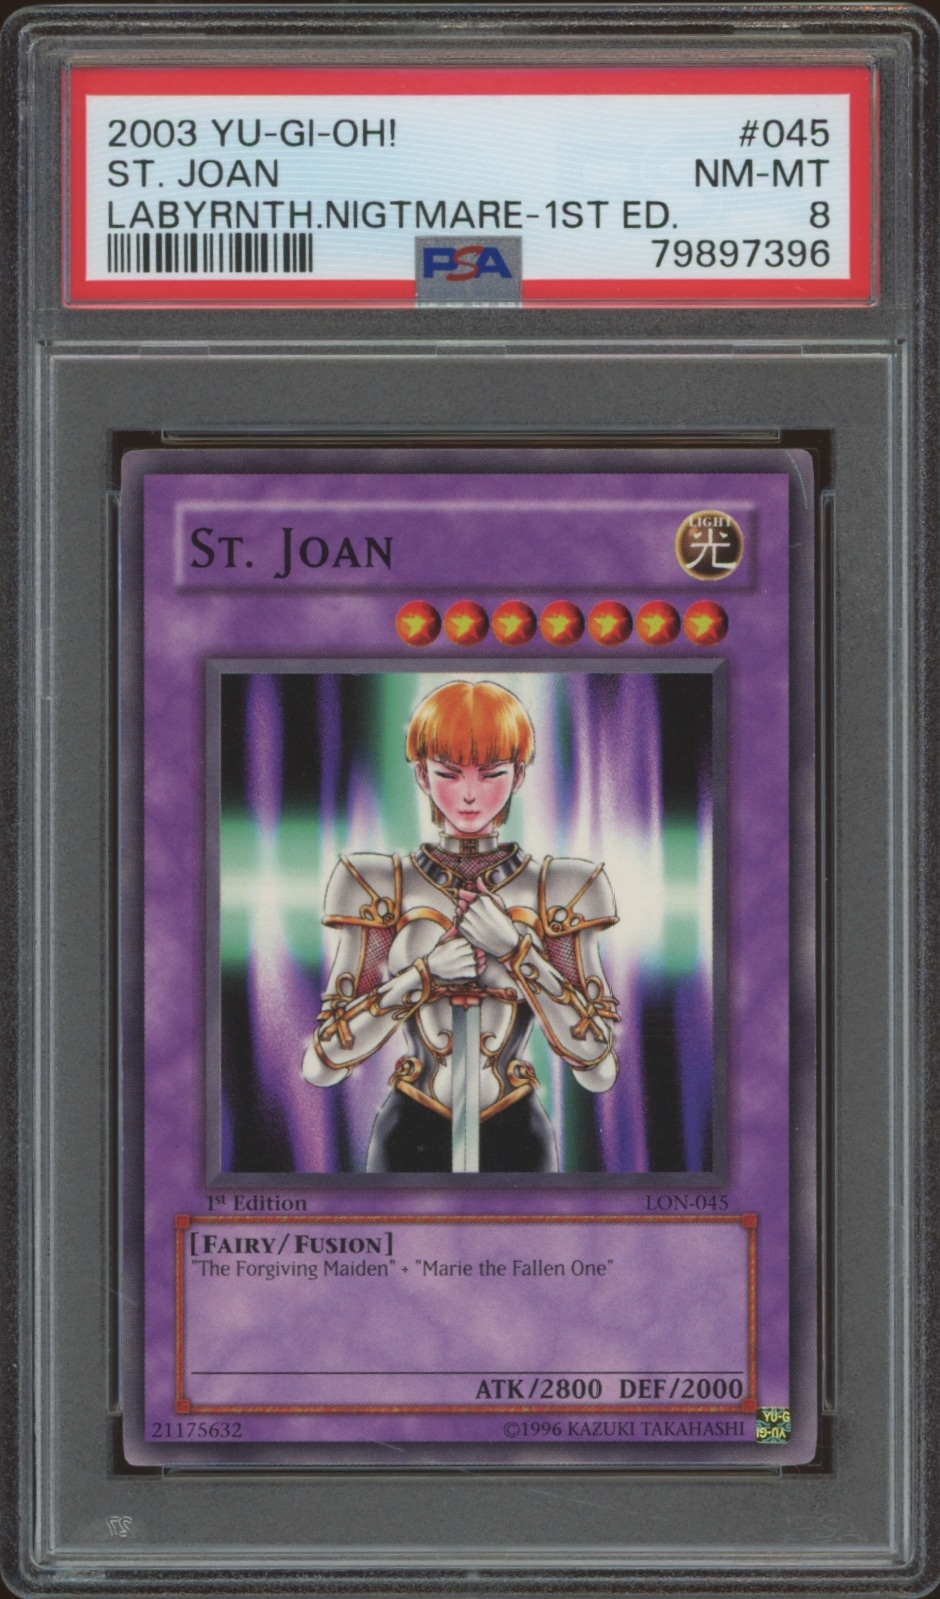 PSA-graded Yu-Gi-Oh! 2003 first edition St. Joan card from Labyrinth of Nightmare set.